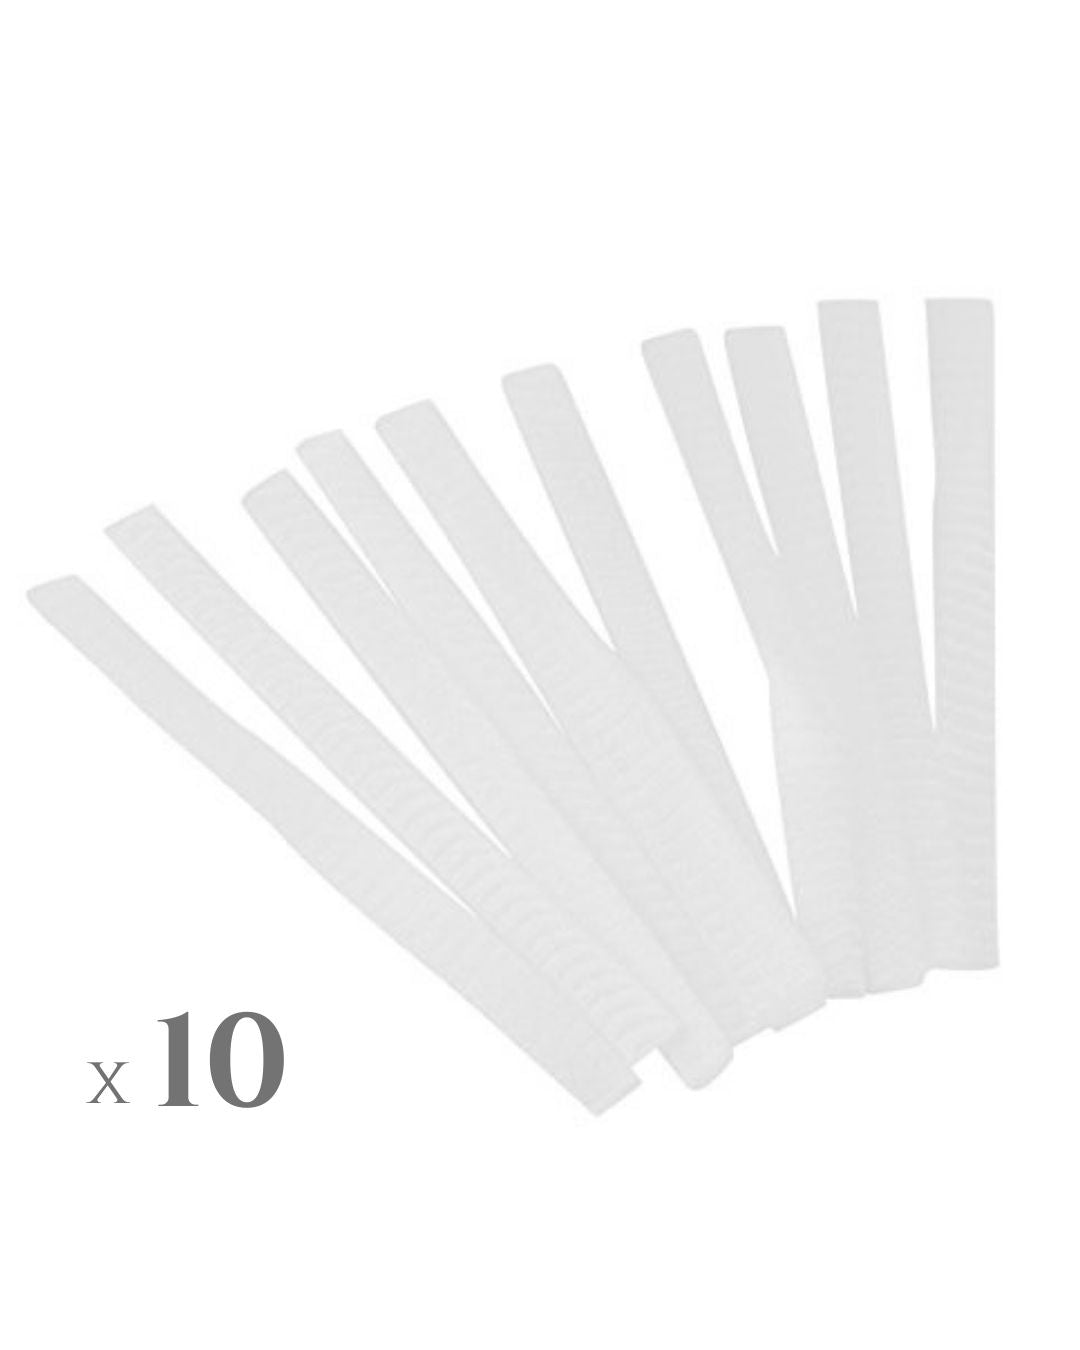 brush guards care protectors(1)